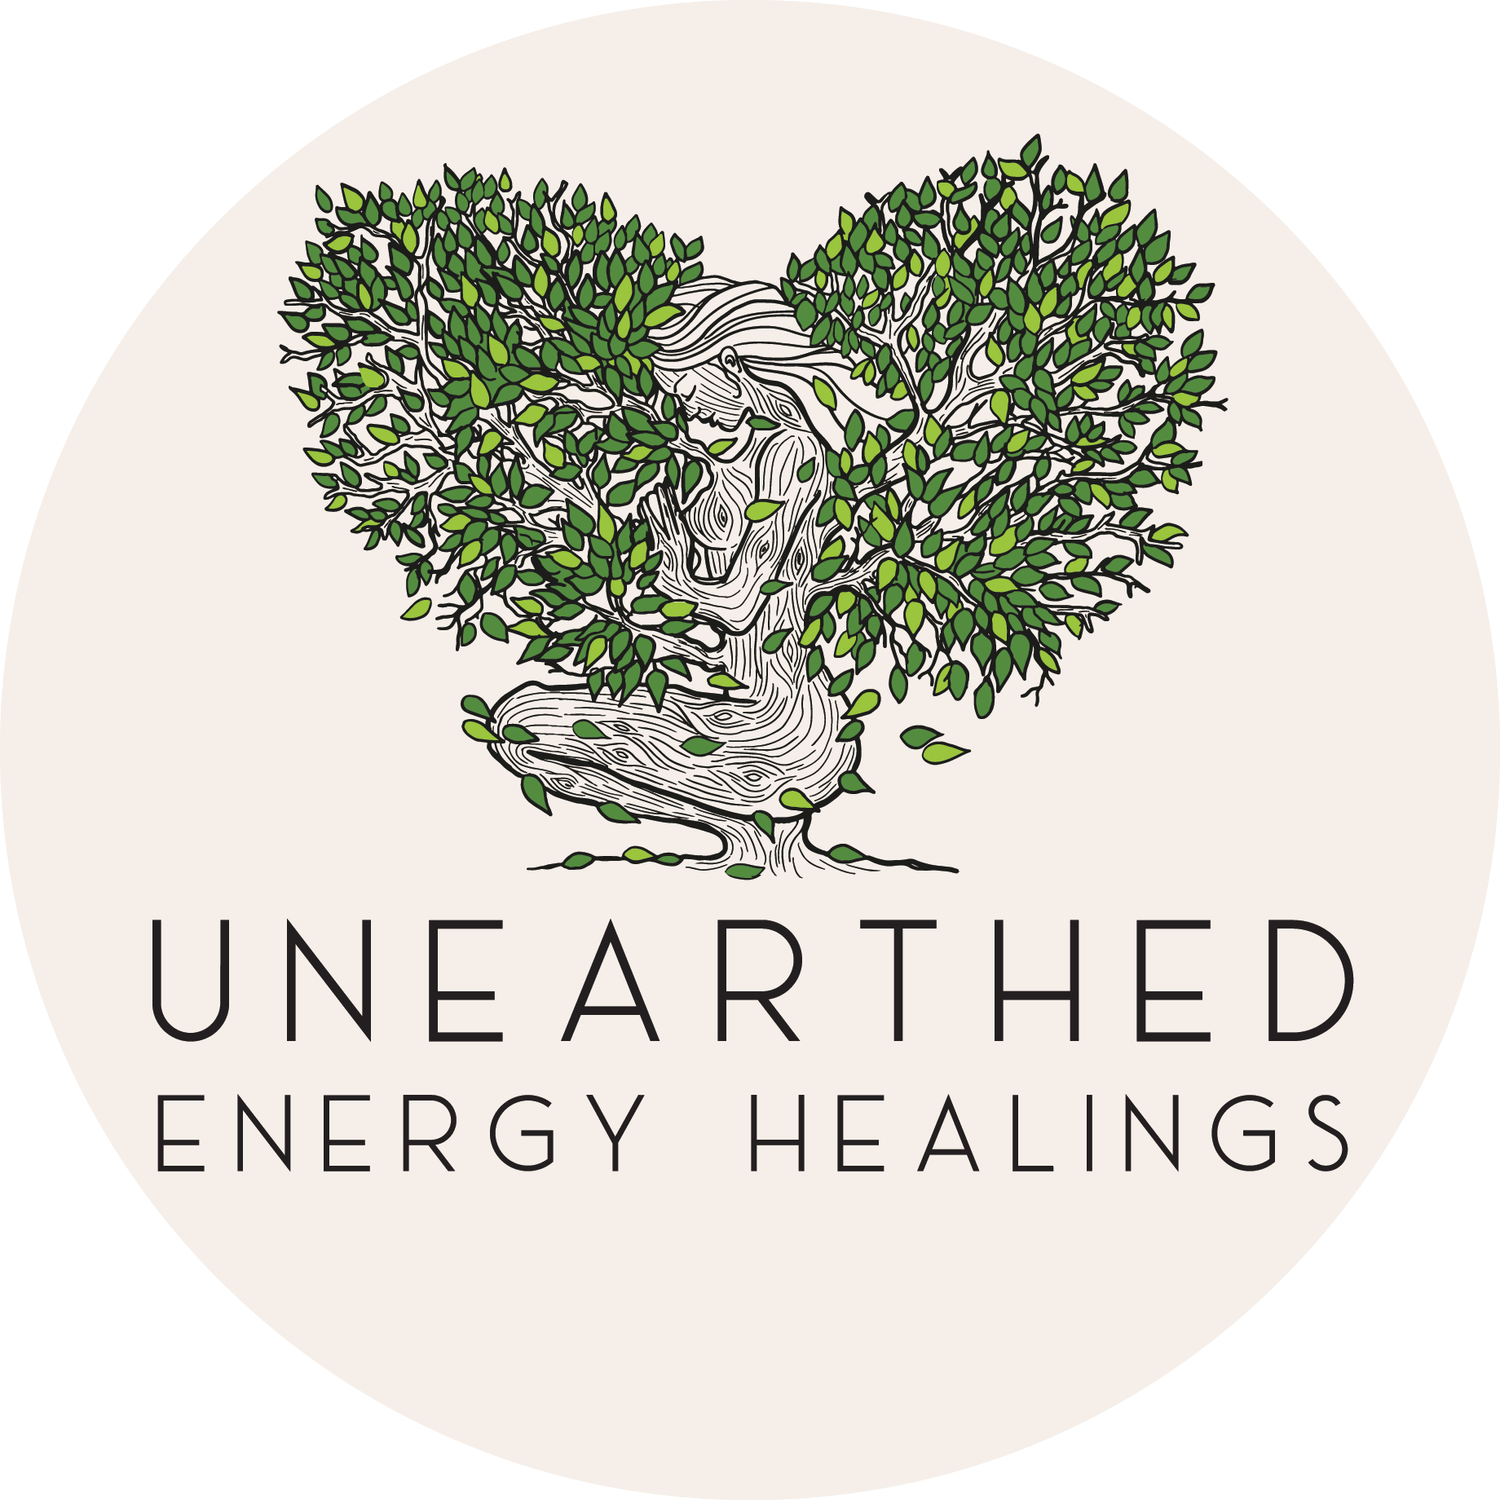 Unearthed Energy Healings